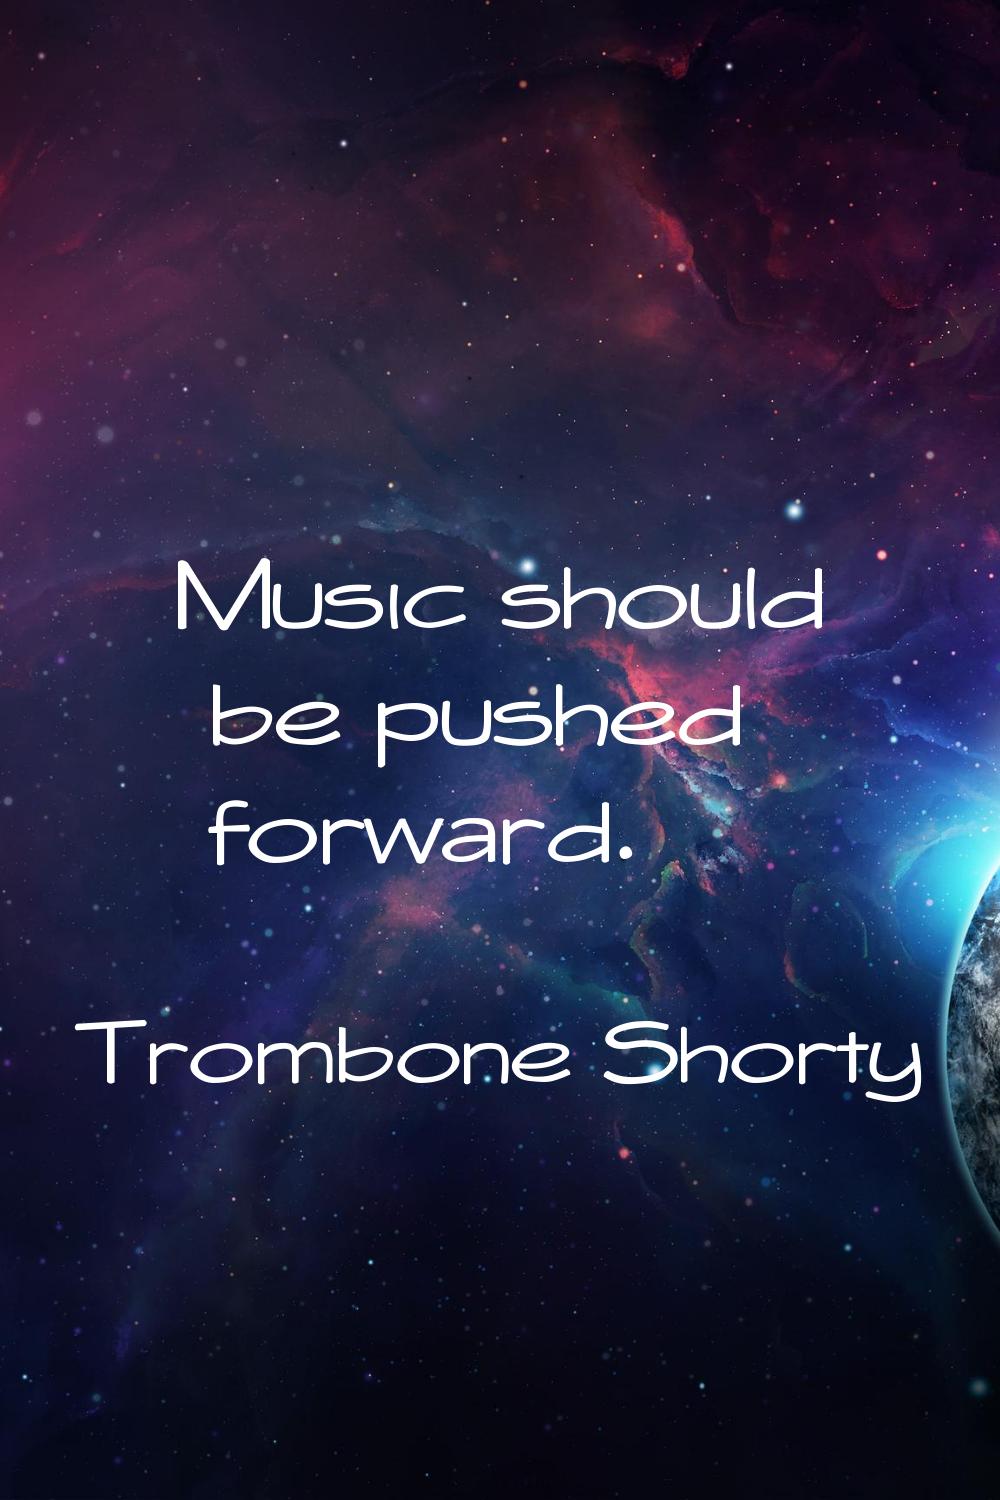 Music should be pushed forward.